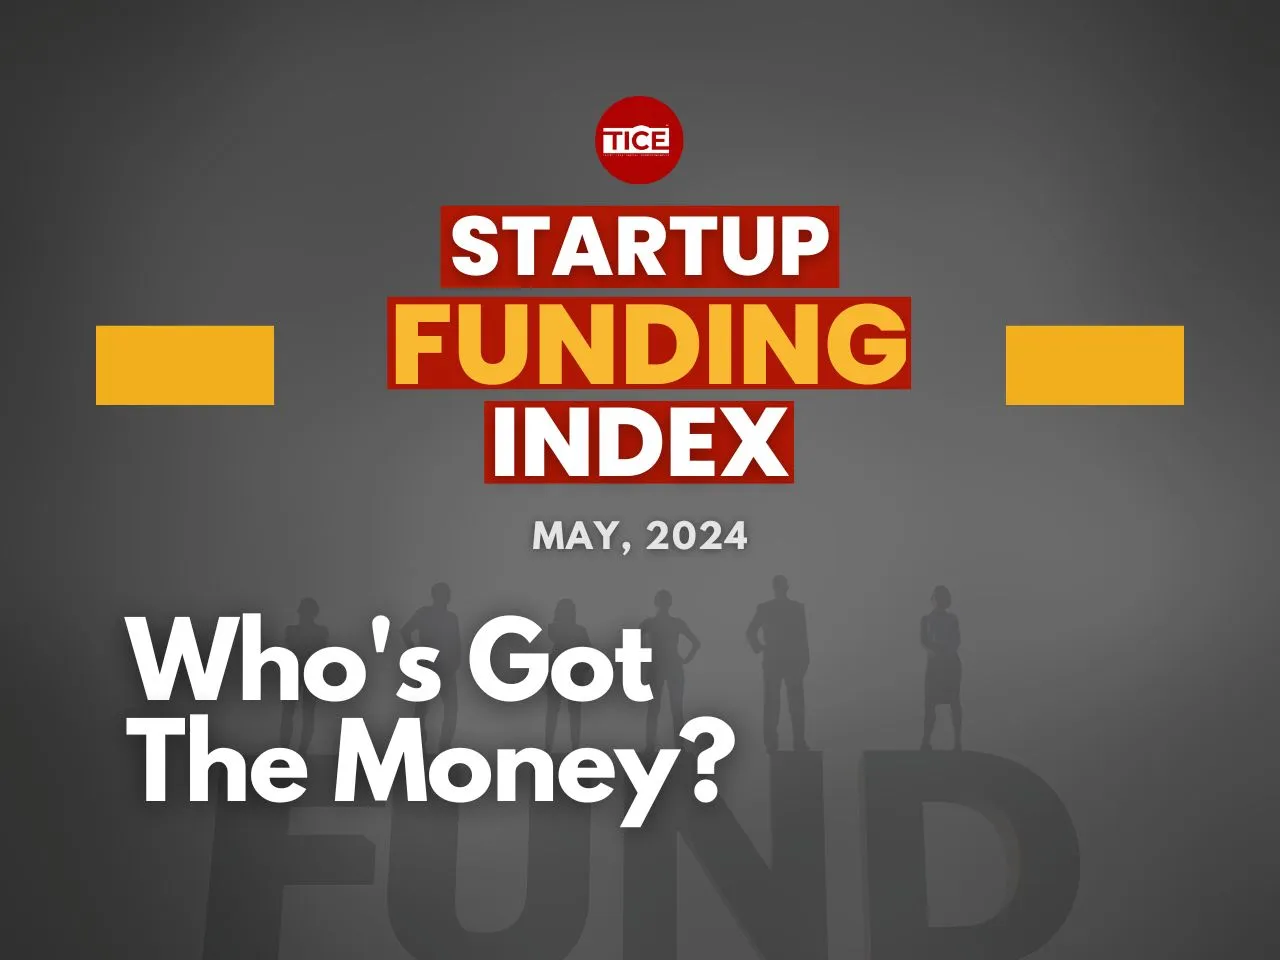 TICE Funding Index May: A Glimpse into Indian Startup Investment